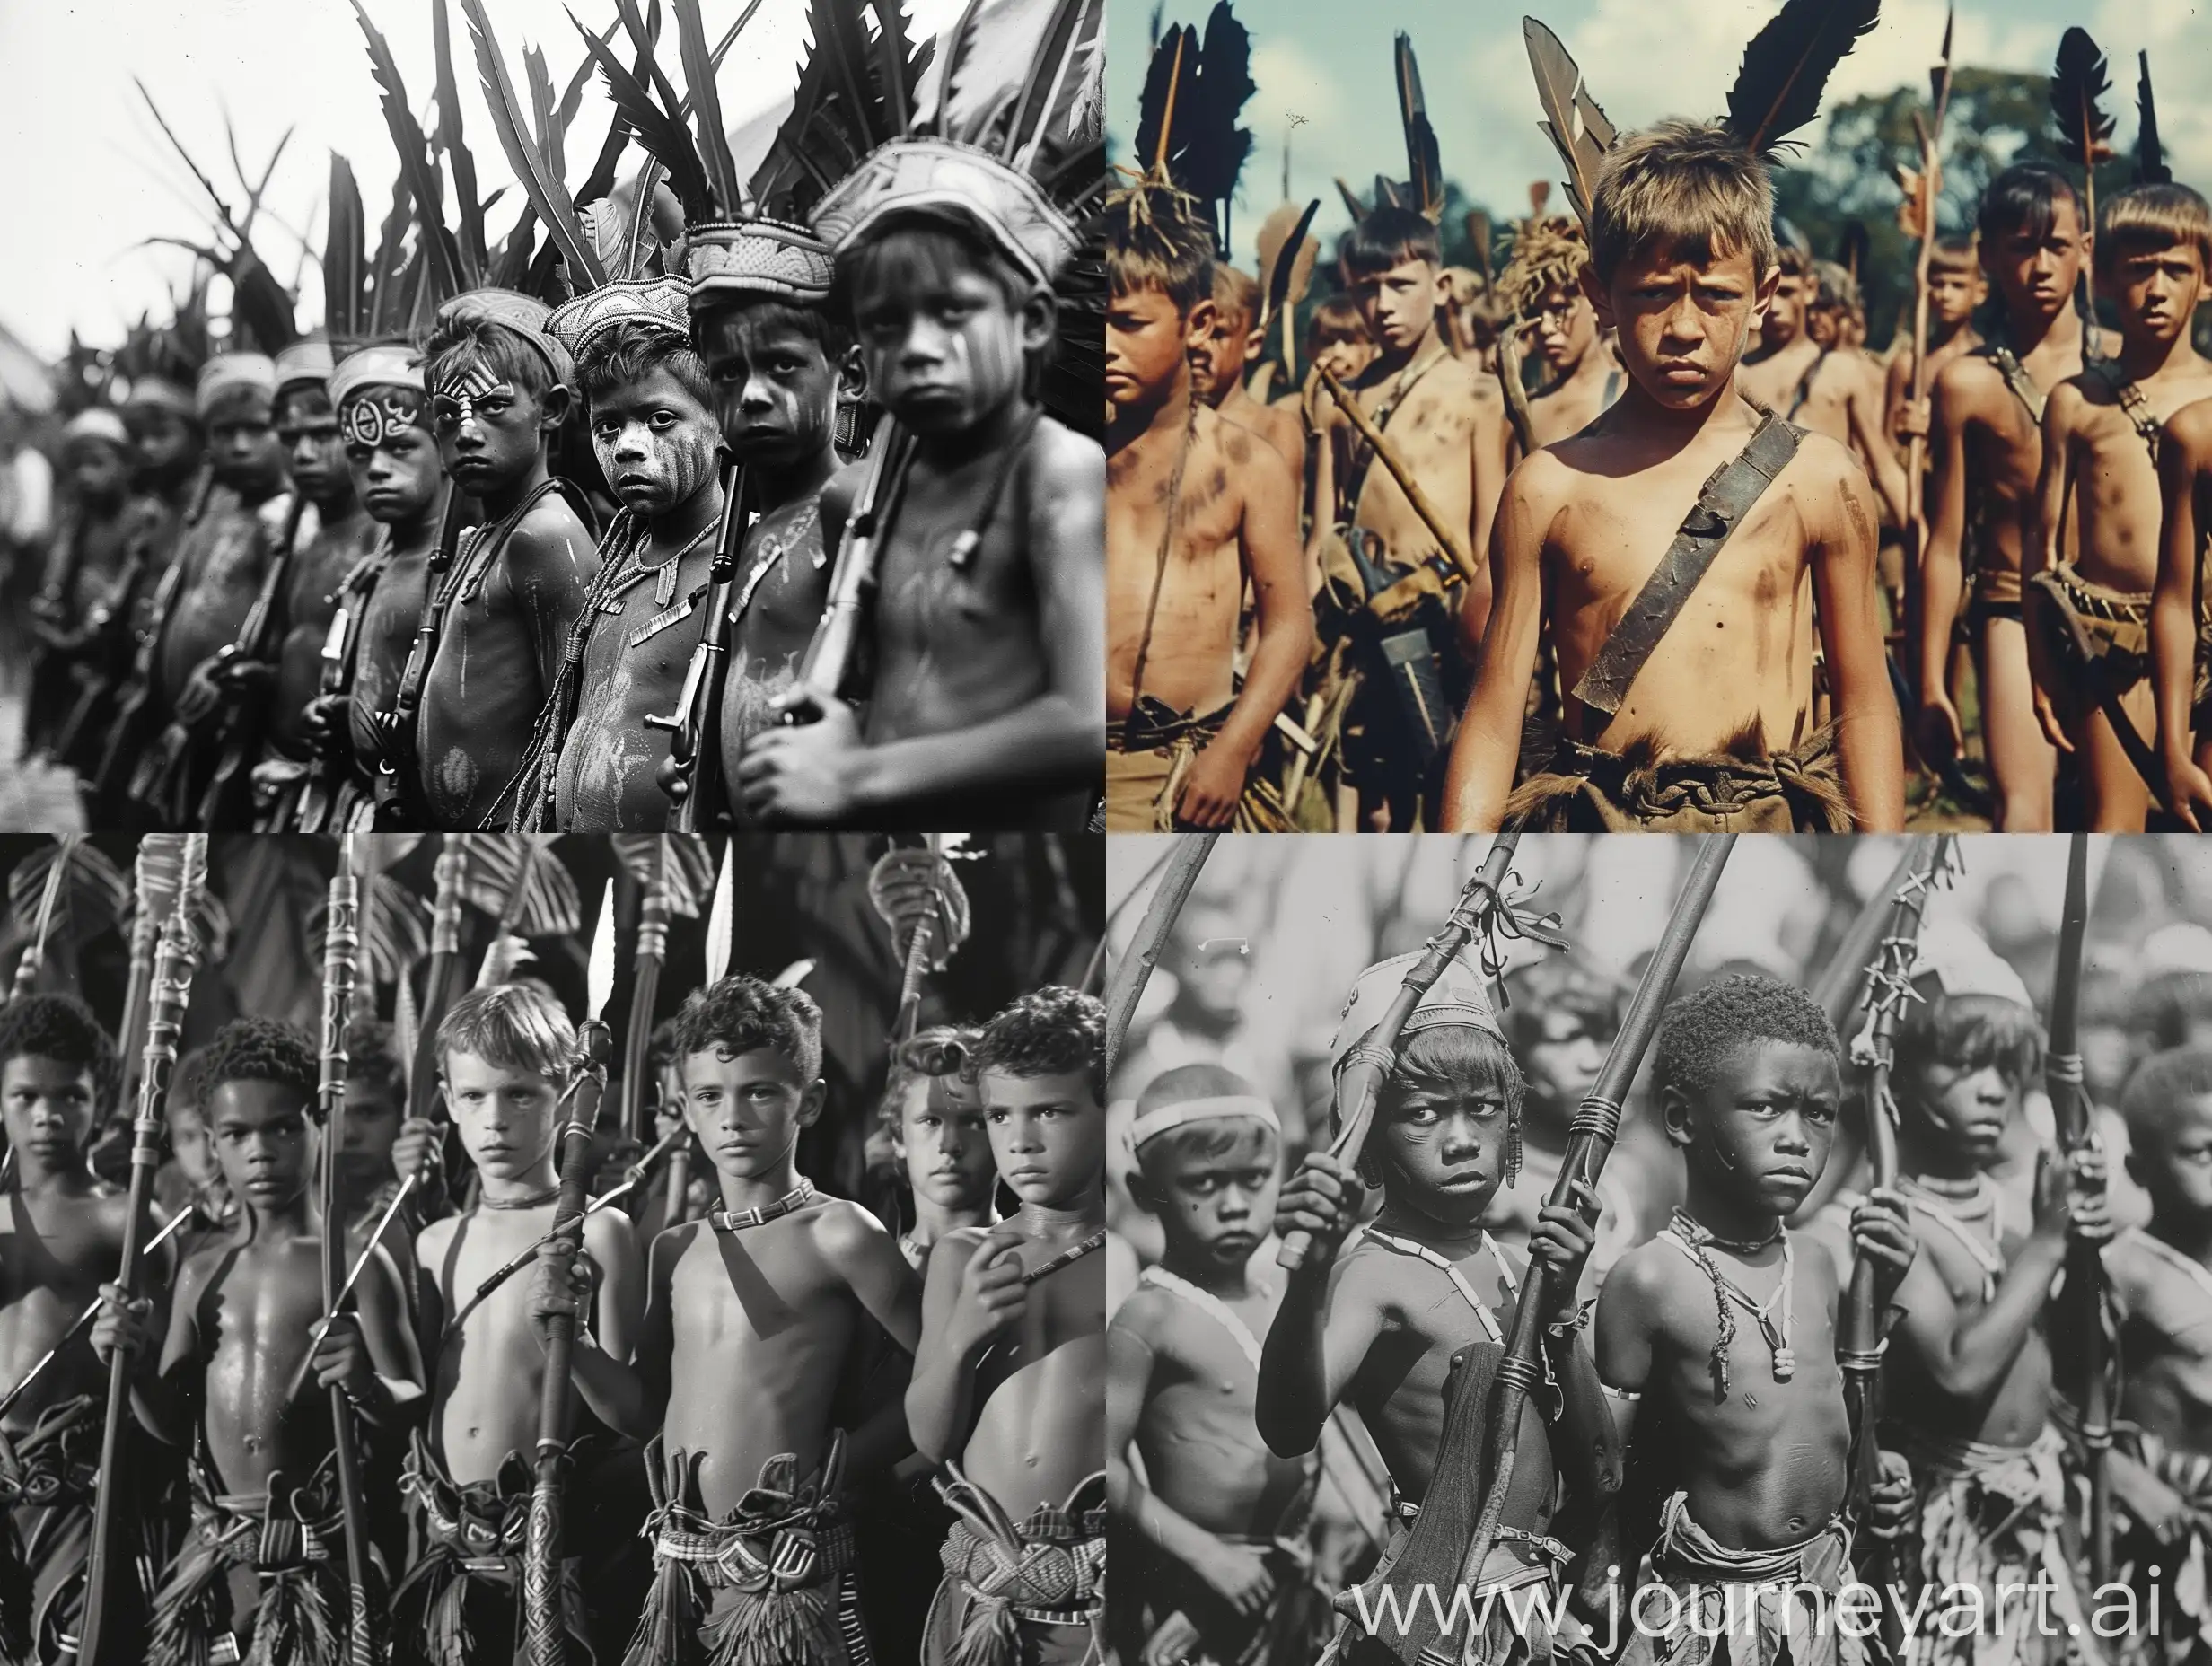 British-Schoolboys-Transformed-into-Tribal-Warriors-in-Tropical-Setting